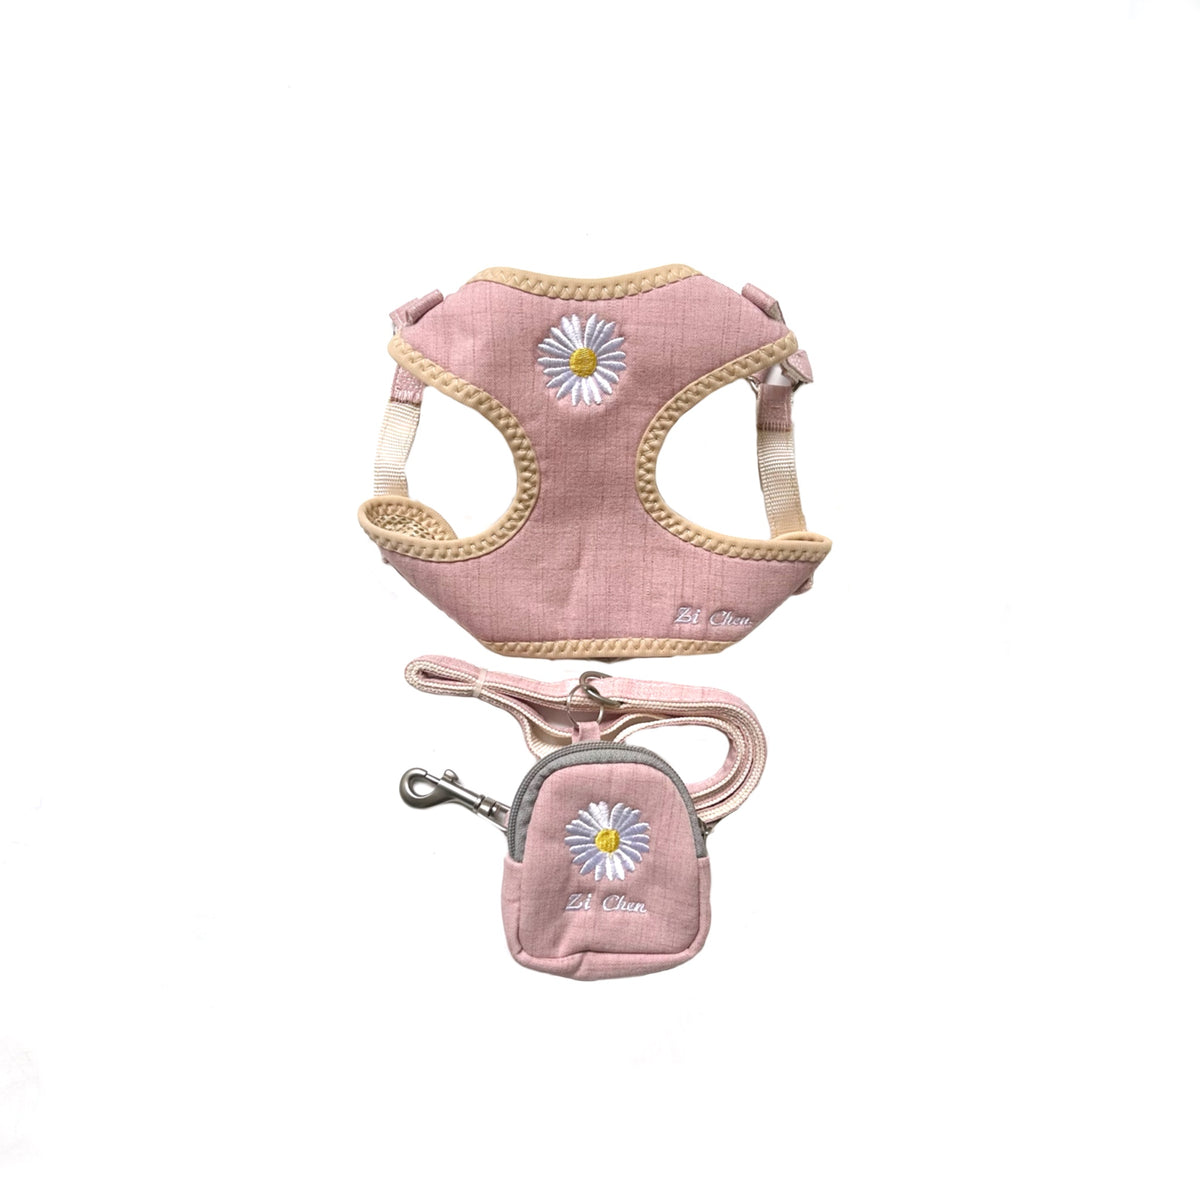 PINK FLOWER HARNESS AND LEASH